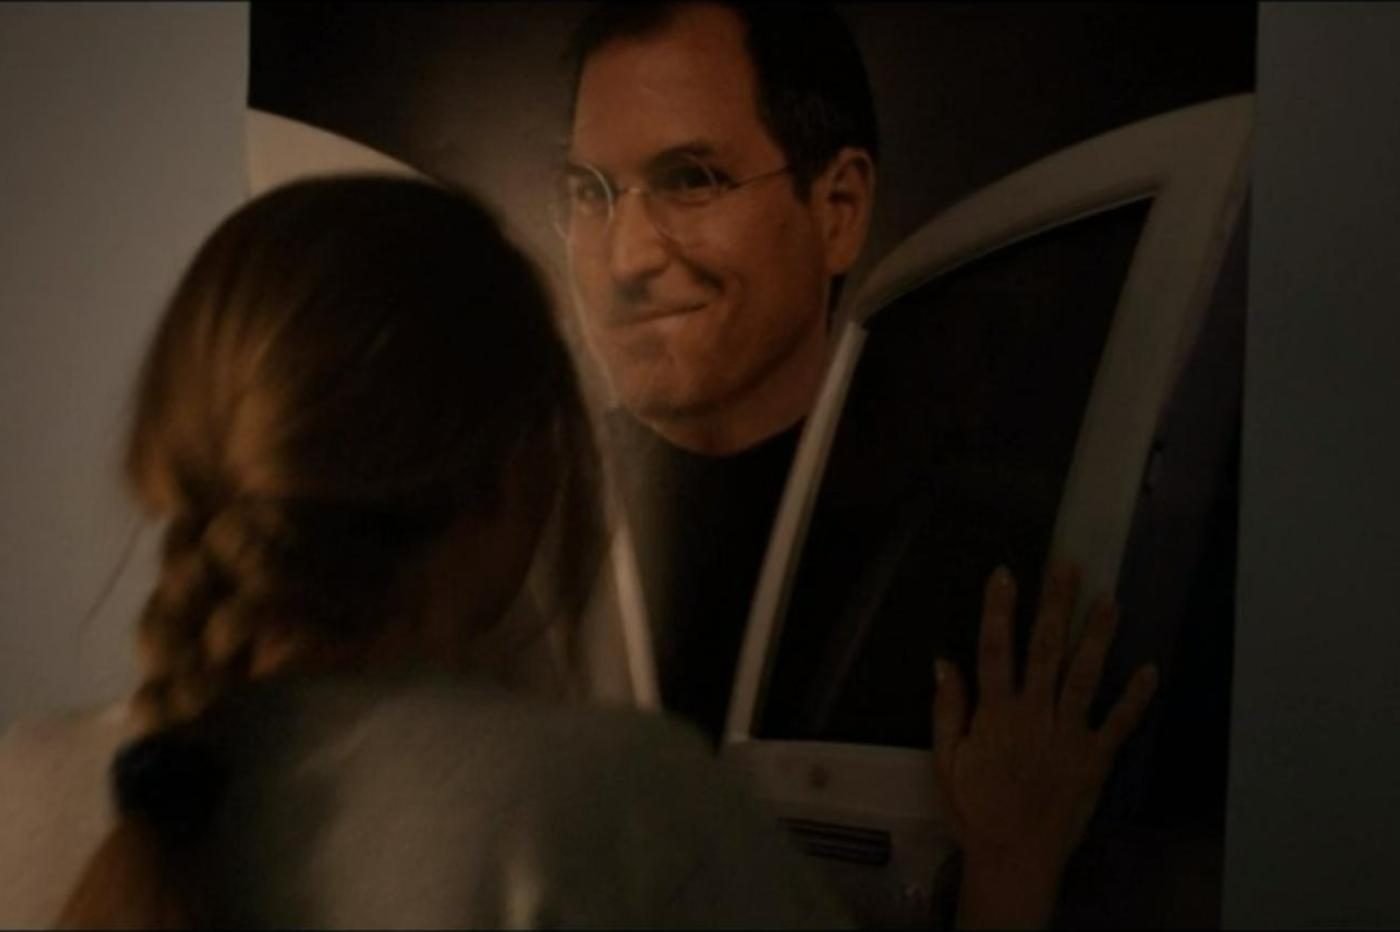 Screenshot from The Dropout series showing Elizabeth Holmes idolizing a Steve Jobs poster